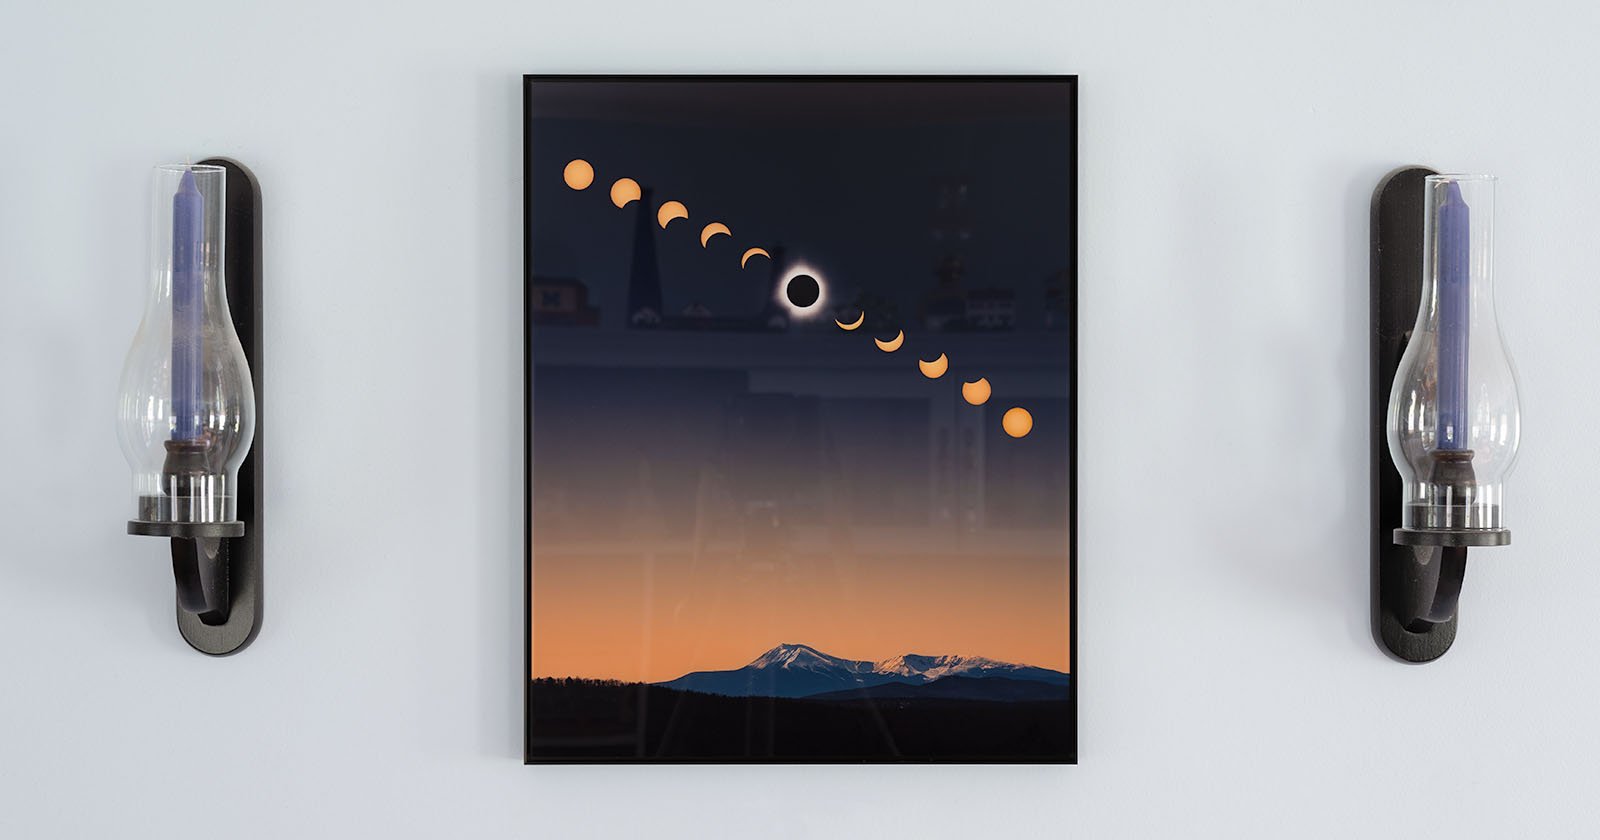 A framed illustration showing the phases of a solar eclipse. The sequence of partial to total eclipse is displayed above a landscape featuring mountain peaks at dusk. The frame is flanked by two wall-mounted oil lamps with glass chimneys.